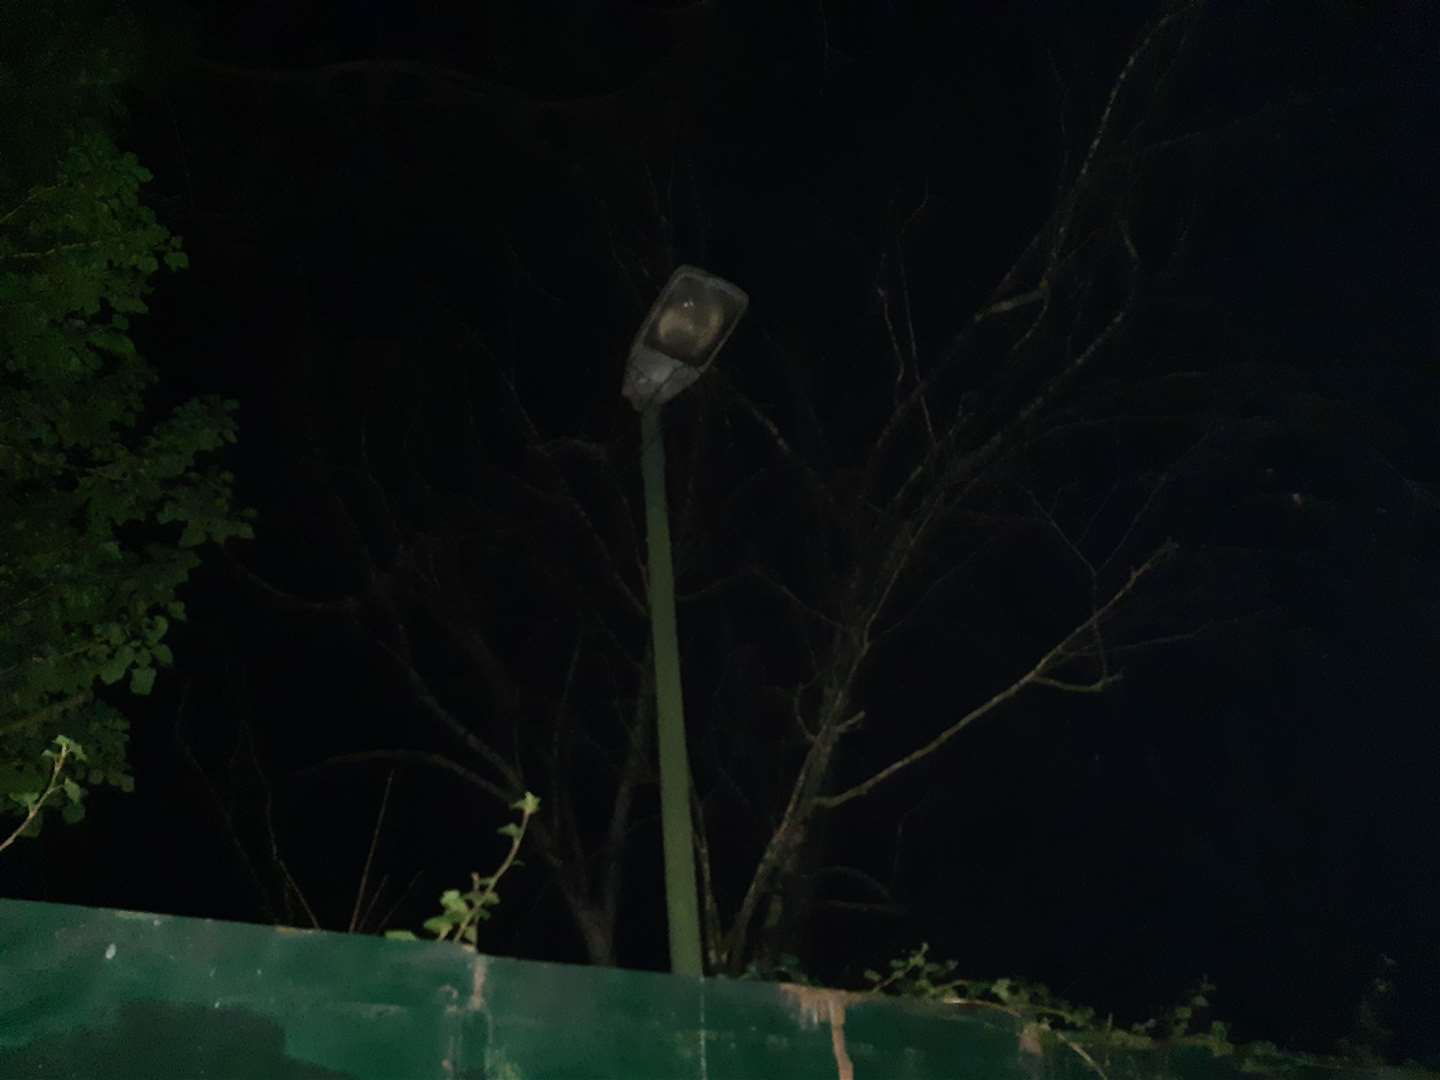 A defective street light on the wrong side of the hoardings